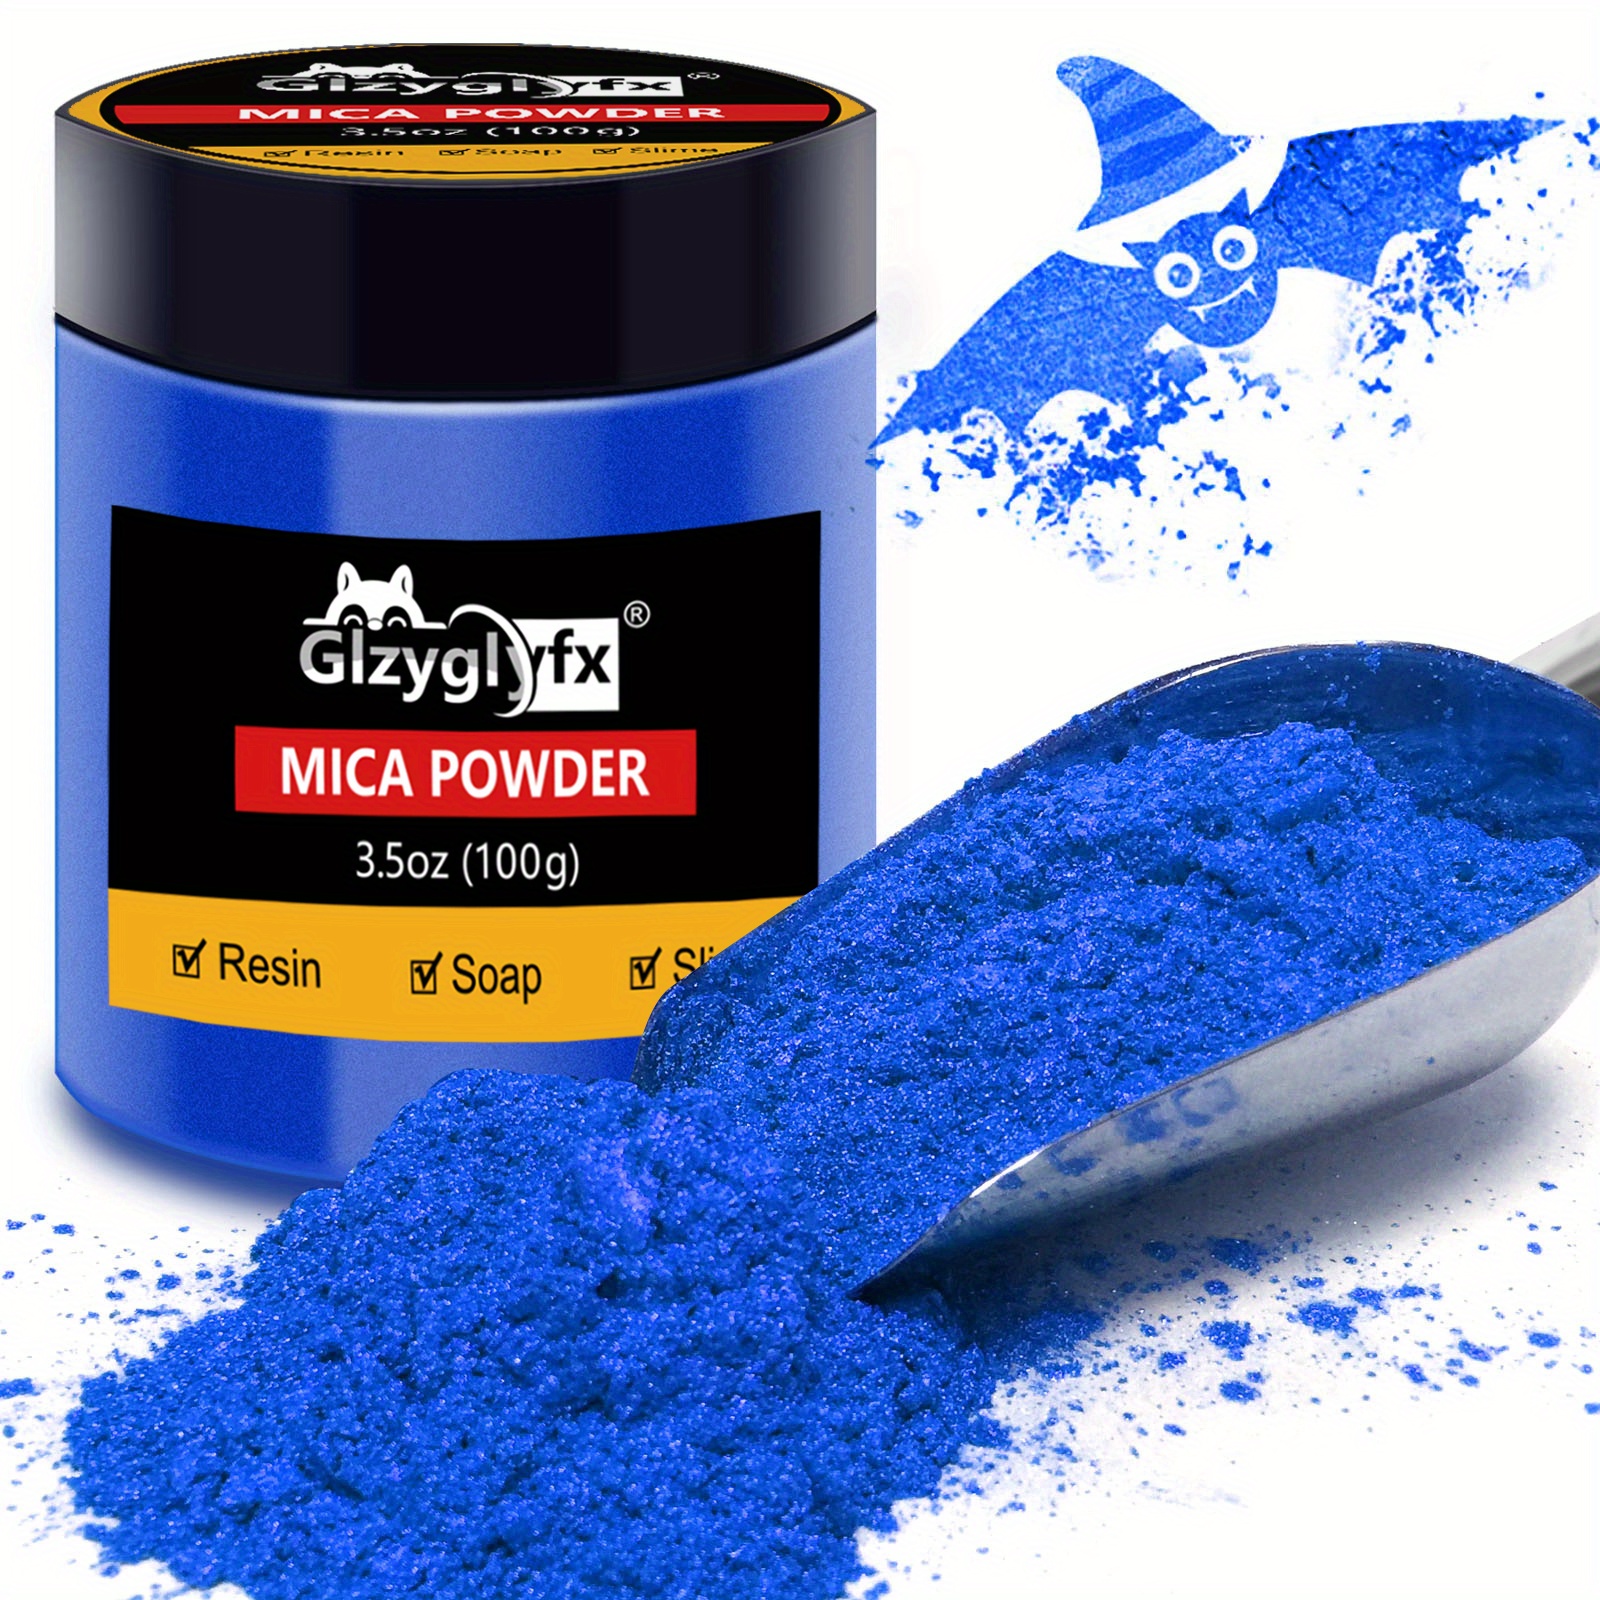 Mica Powder for Epoxy Resin - 24 Pearl Colors Pigment Powder 0.35 oz(10g) / Bottle, Cosmetic Grade Glitter Mica Powder for Soap Dye, Candle Making, Ba